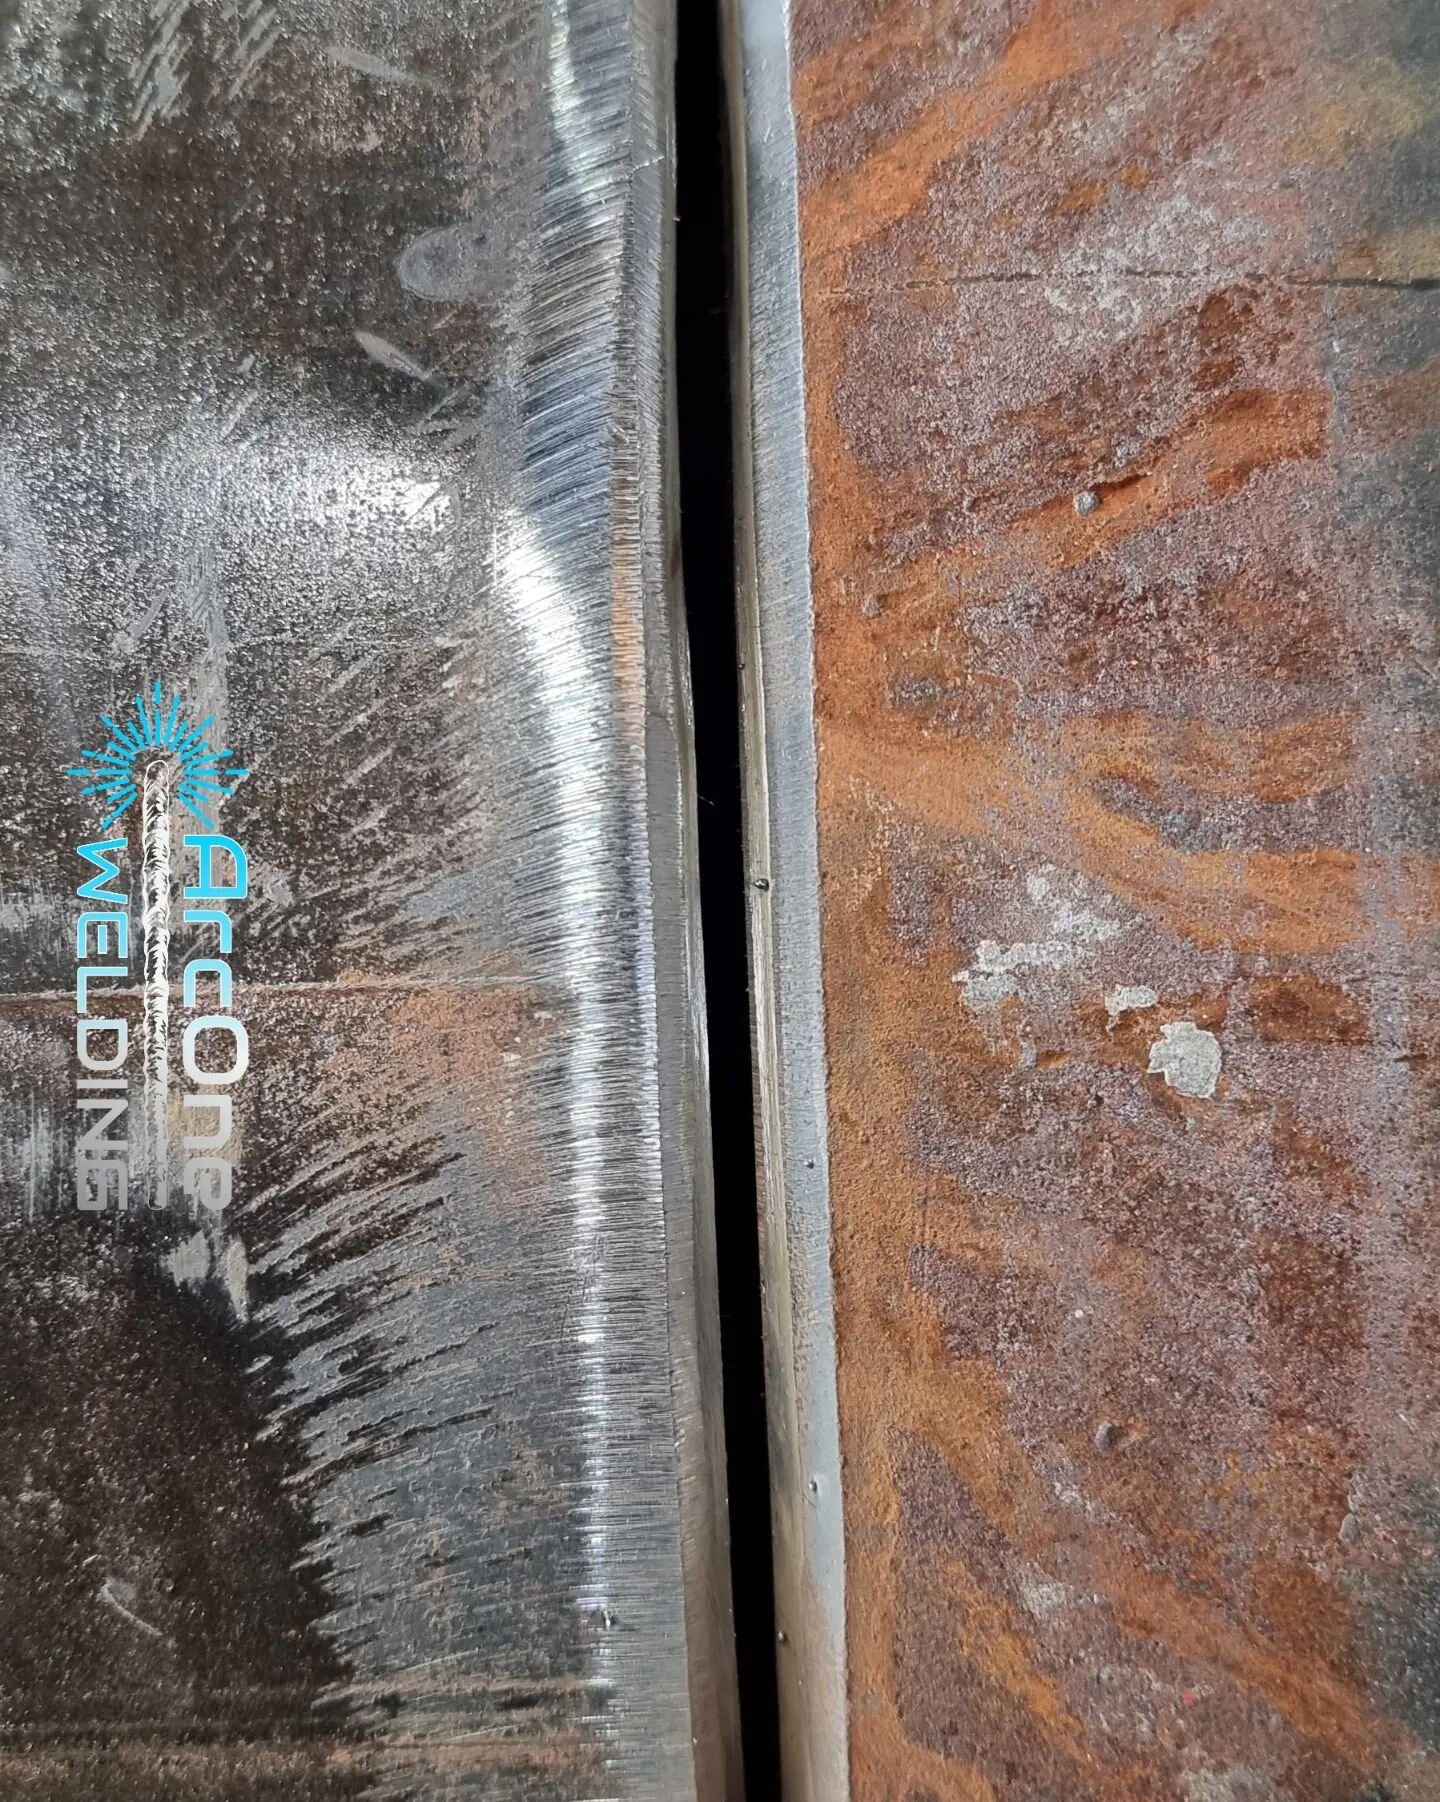 The process of welding a 14&quot;  butt
3mm gap rooted at 135a
Hotpass at 260A
Cap at 240A 
●
●
○
○
●
○
#welding #pipewelder #weldporn #migwelding #weldernation #welder #welderzone #weldernation #weldporn&nbsp;#welding #welder #weld #weldforlife #wel